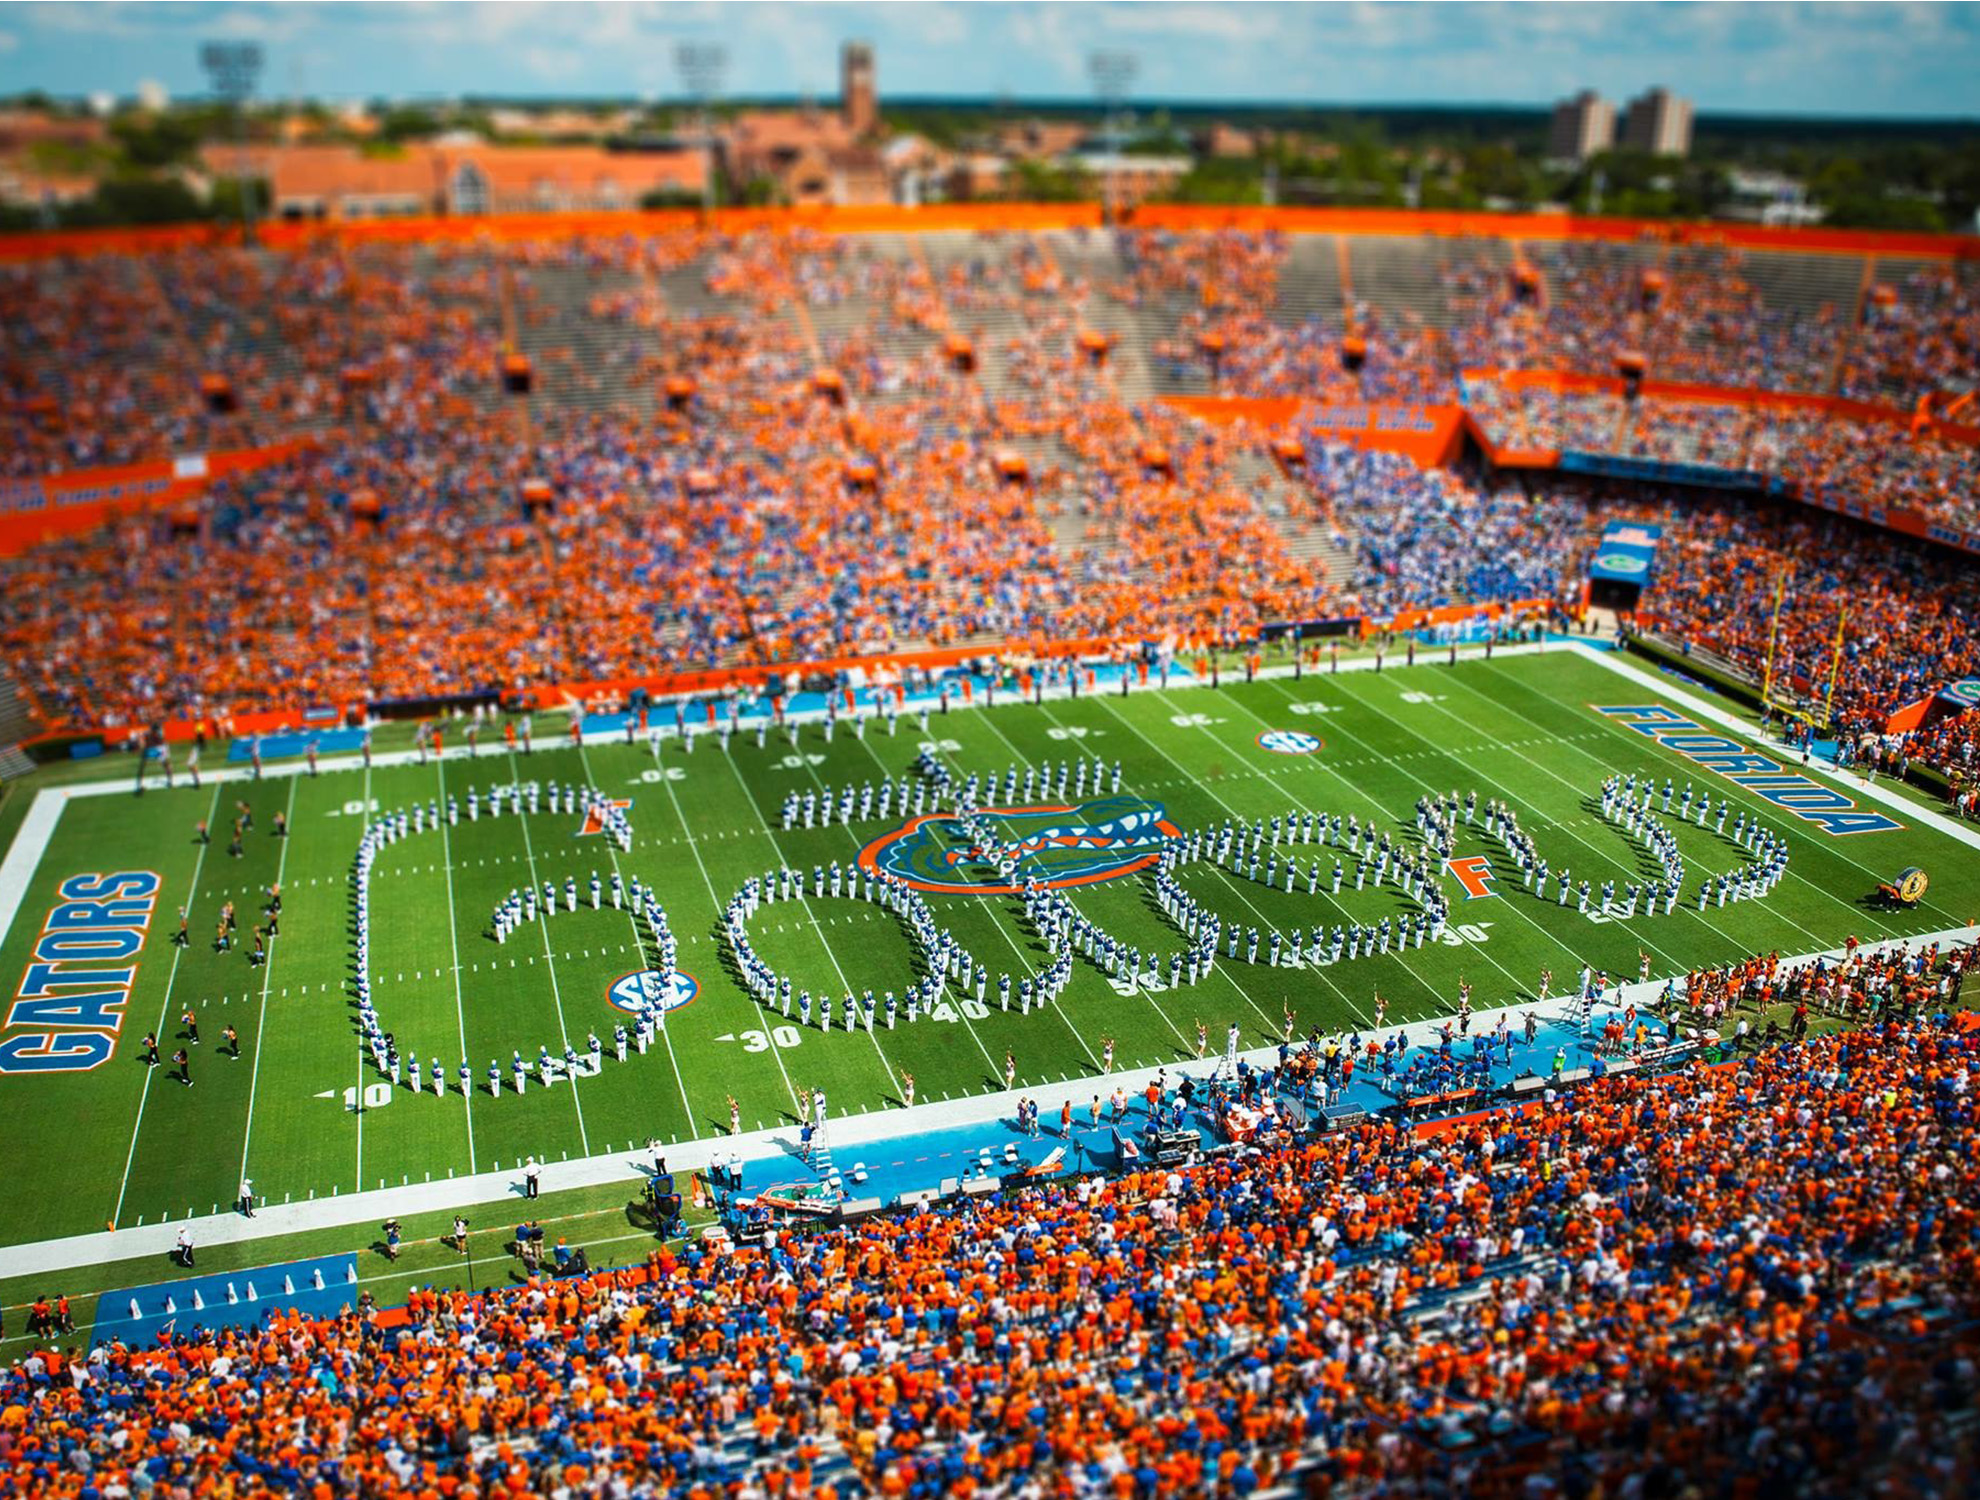 <p>The Gator Marching Band is now hard at work preparing to, once again, set the tempo for the University of Florida. Photo credit: UF/Long Duong.</p>